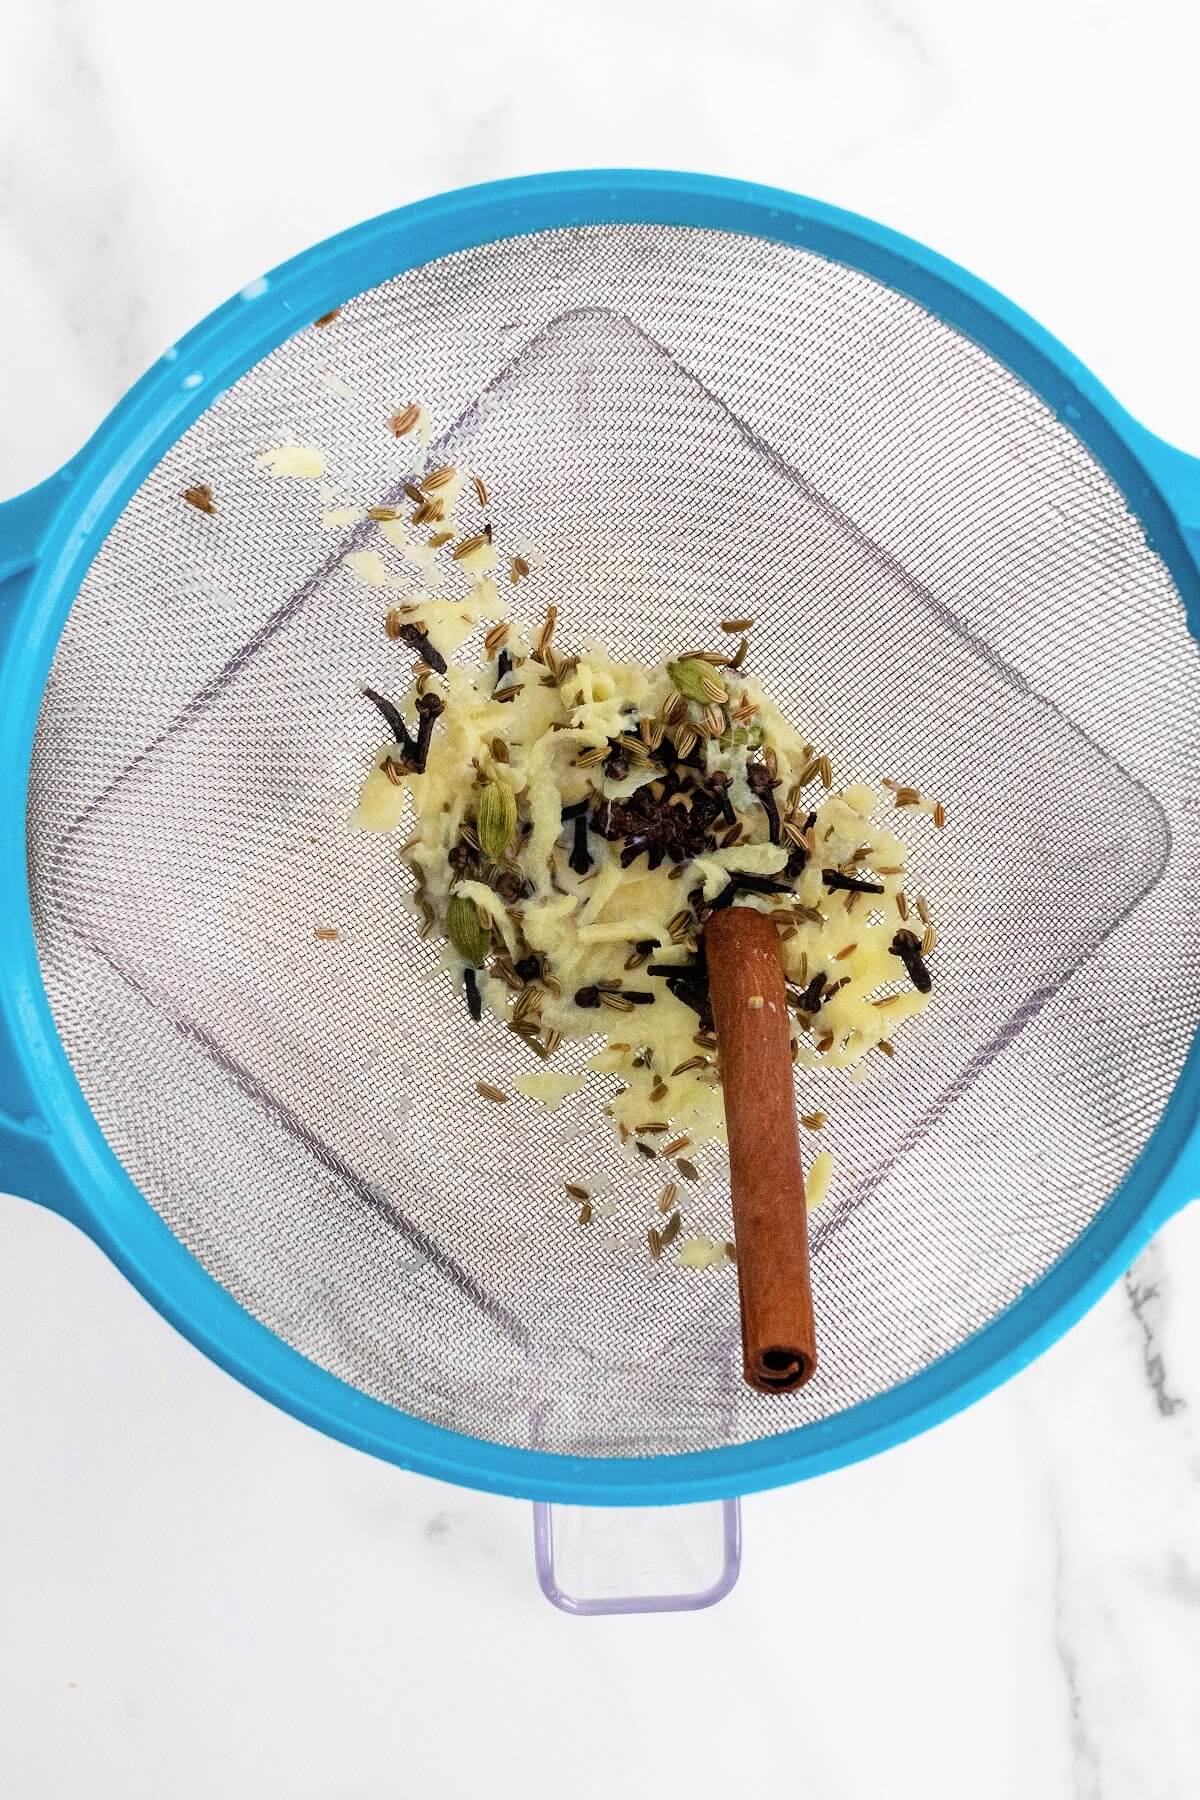 Fine mesh strainer filled with a wet cinnamon stick, whole cloves, grated ginger, fennel seeds and cardamom pods, sitting on top of a blender.